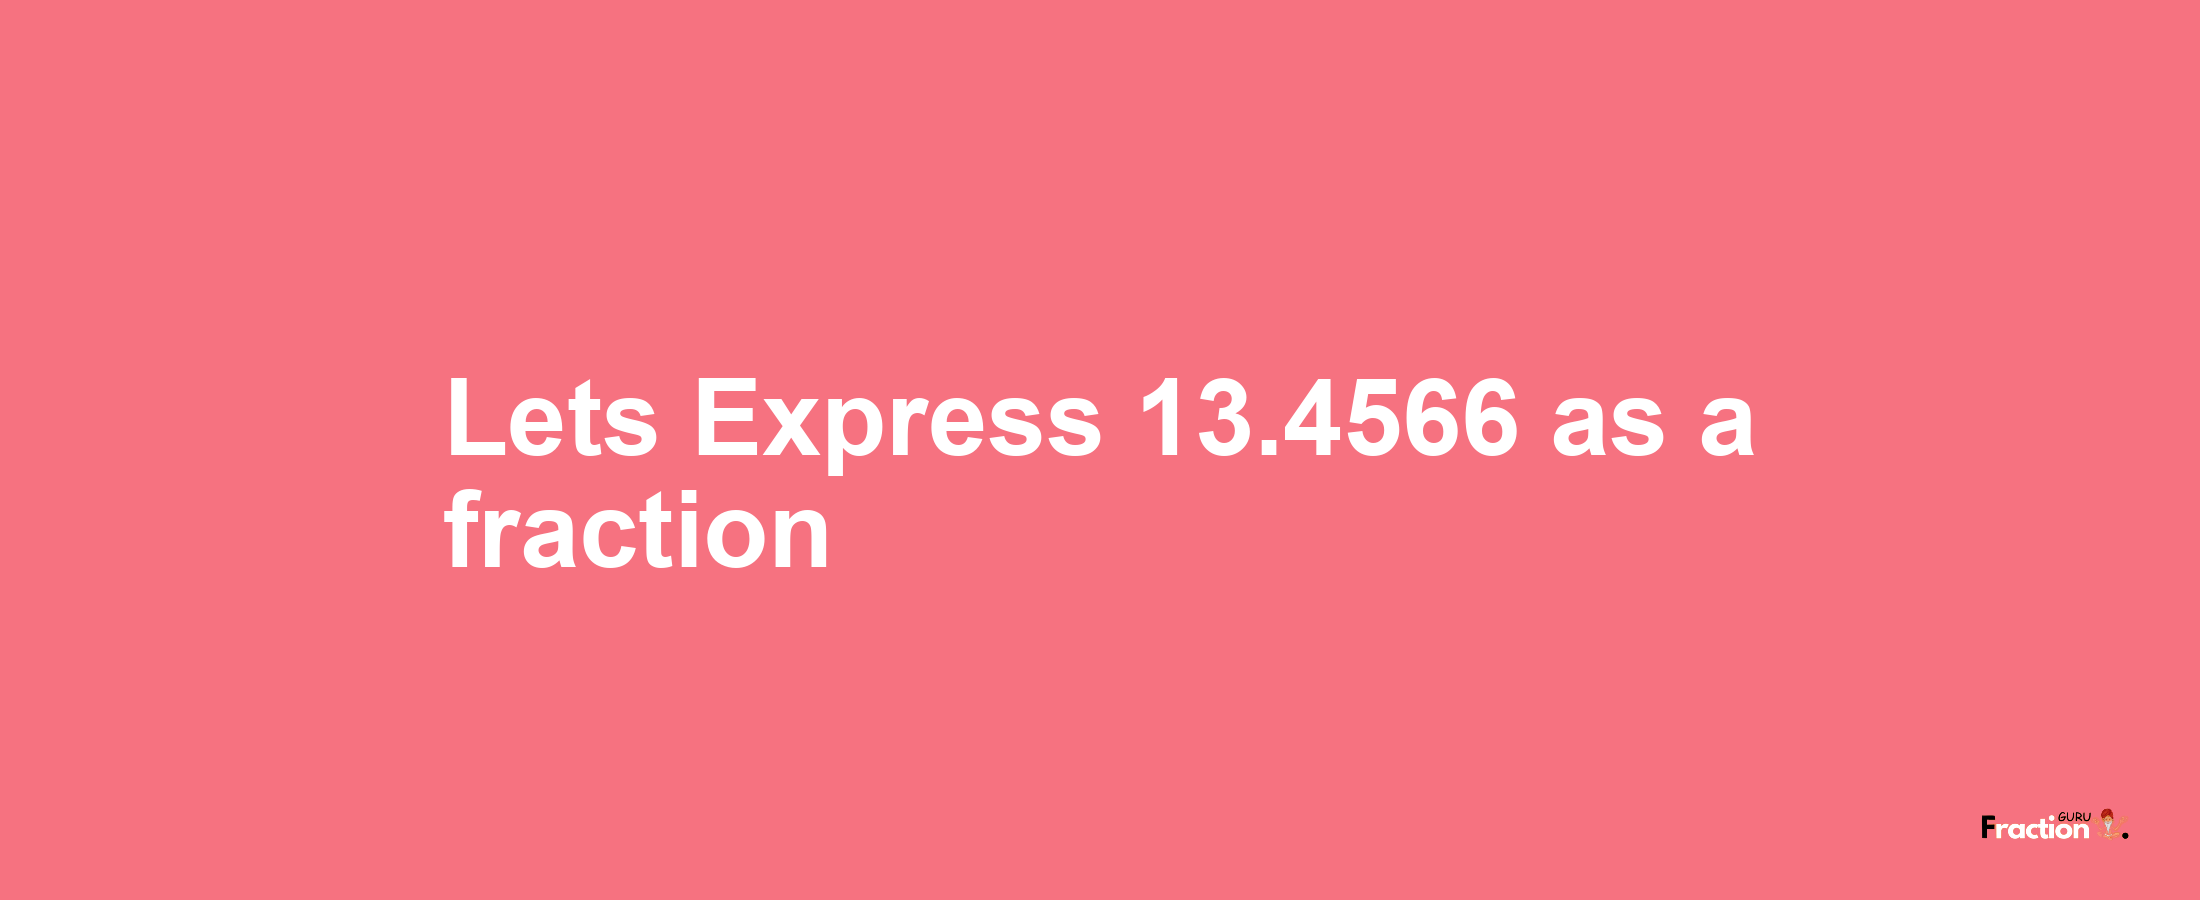 Lets Express 13.4566 as afraction